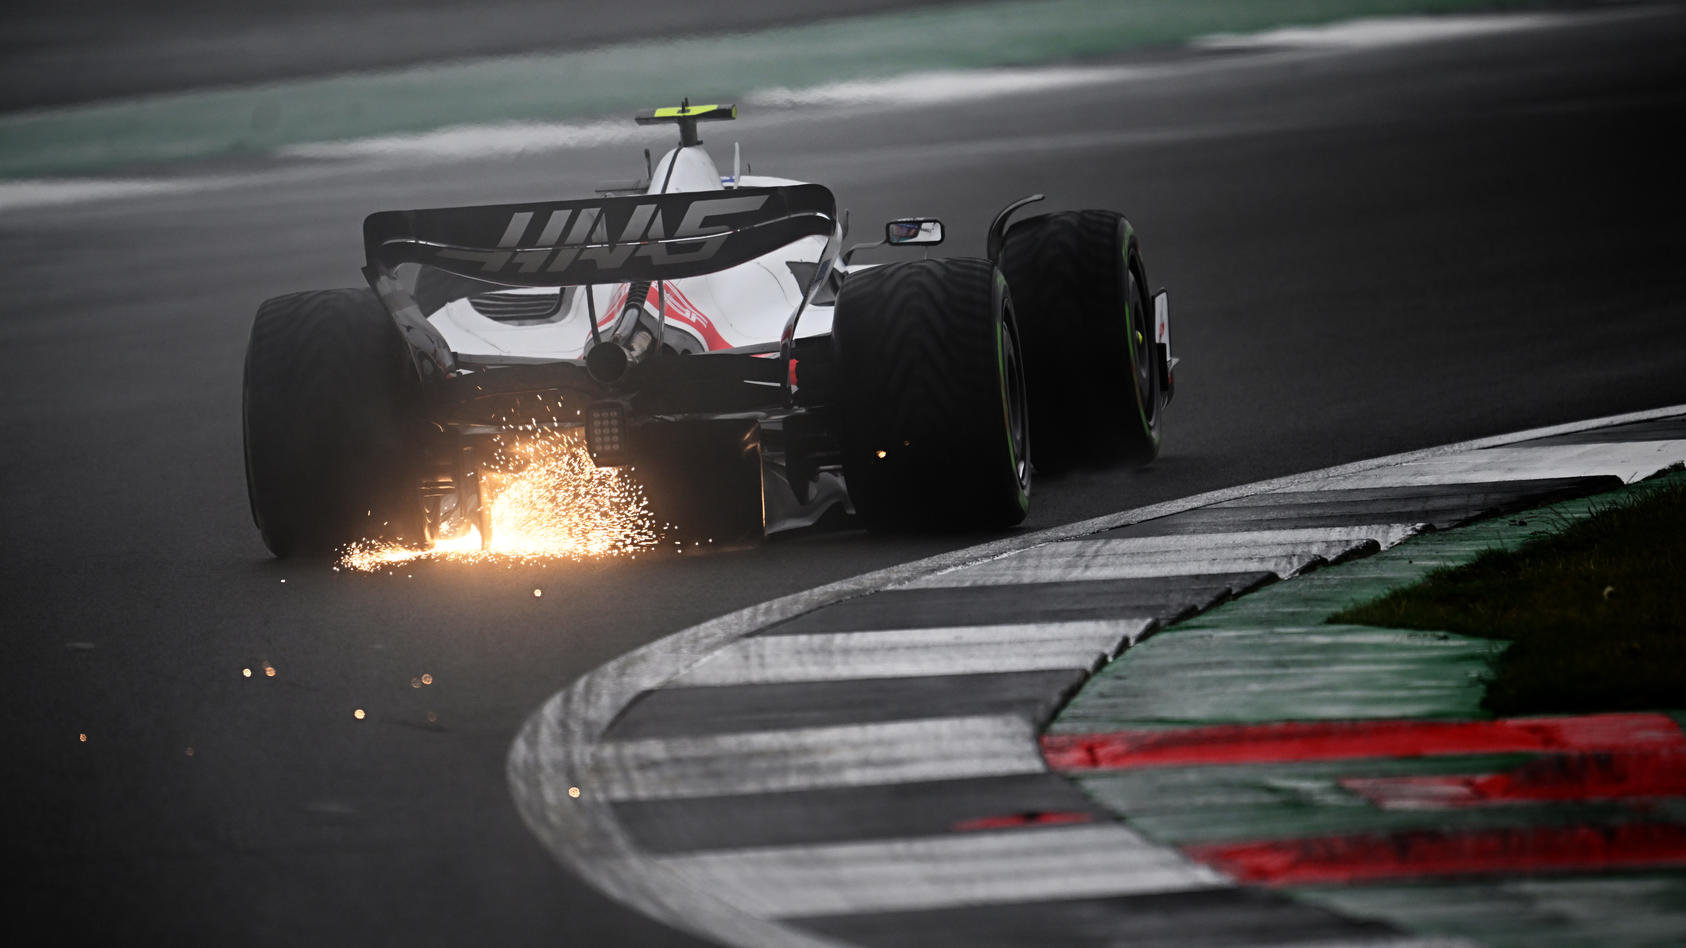 NORTHAMPTON, ENGLAND - JULY 02: Sparks fly behind Mick Schumacher of Germany driving the (47) Haas F1 VF-22 Ferrari during qualifying ahead of the F1 Grand Prix of Great Britain at Silverstone on July 02, 2022 in Northampton, England. (Photo by Clive